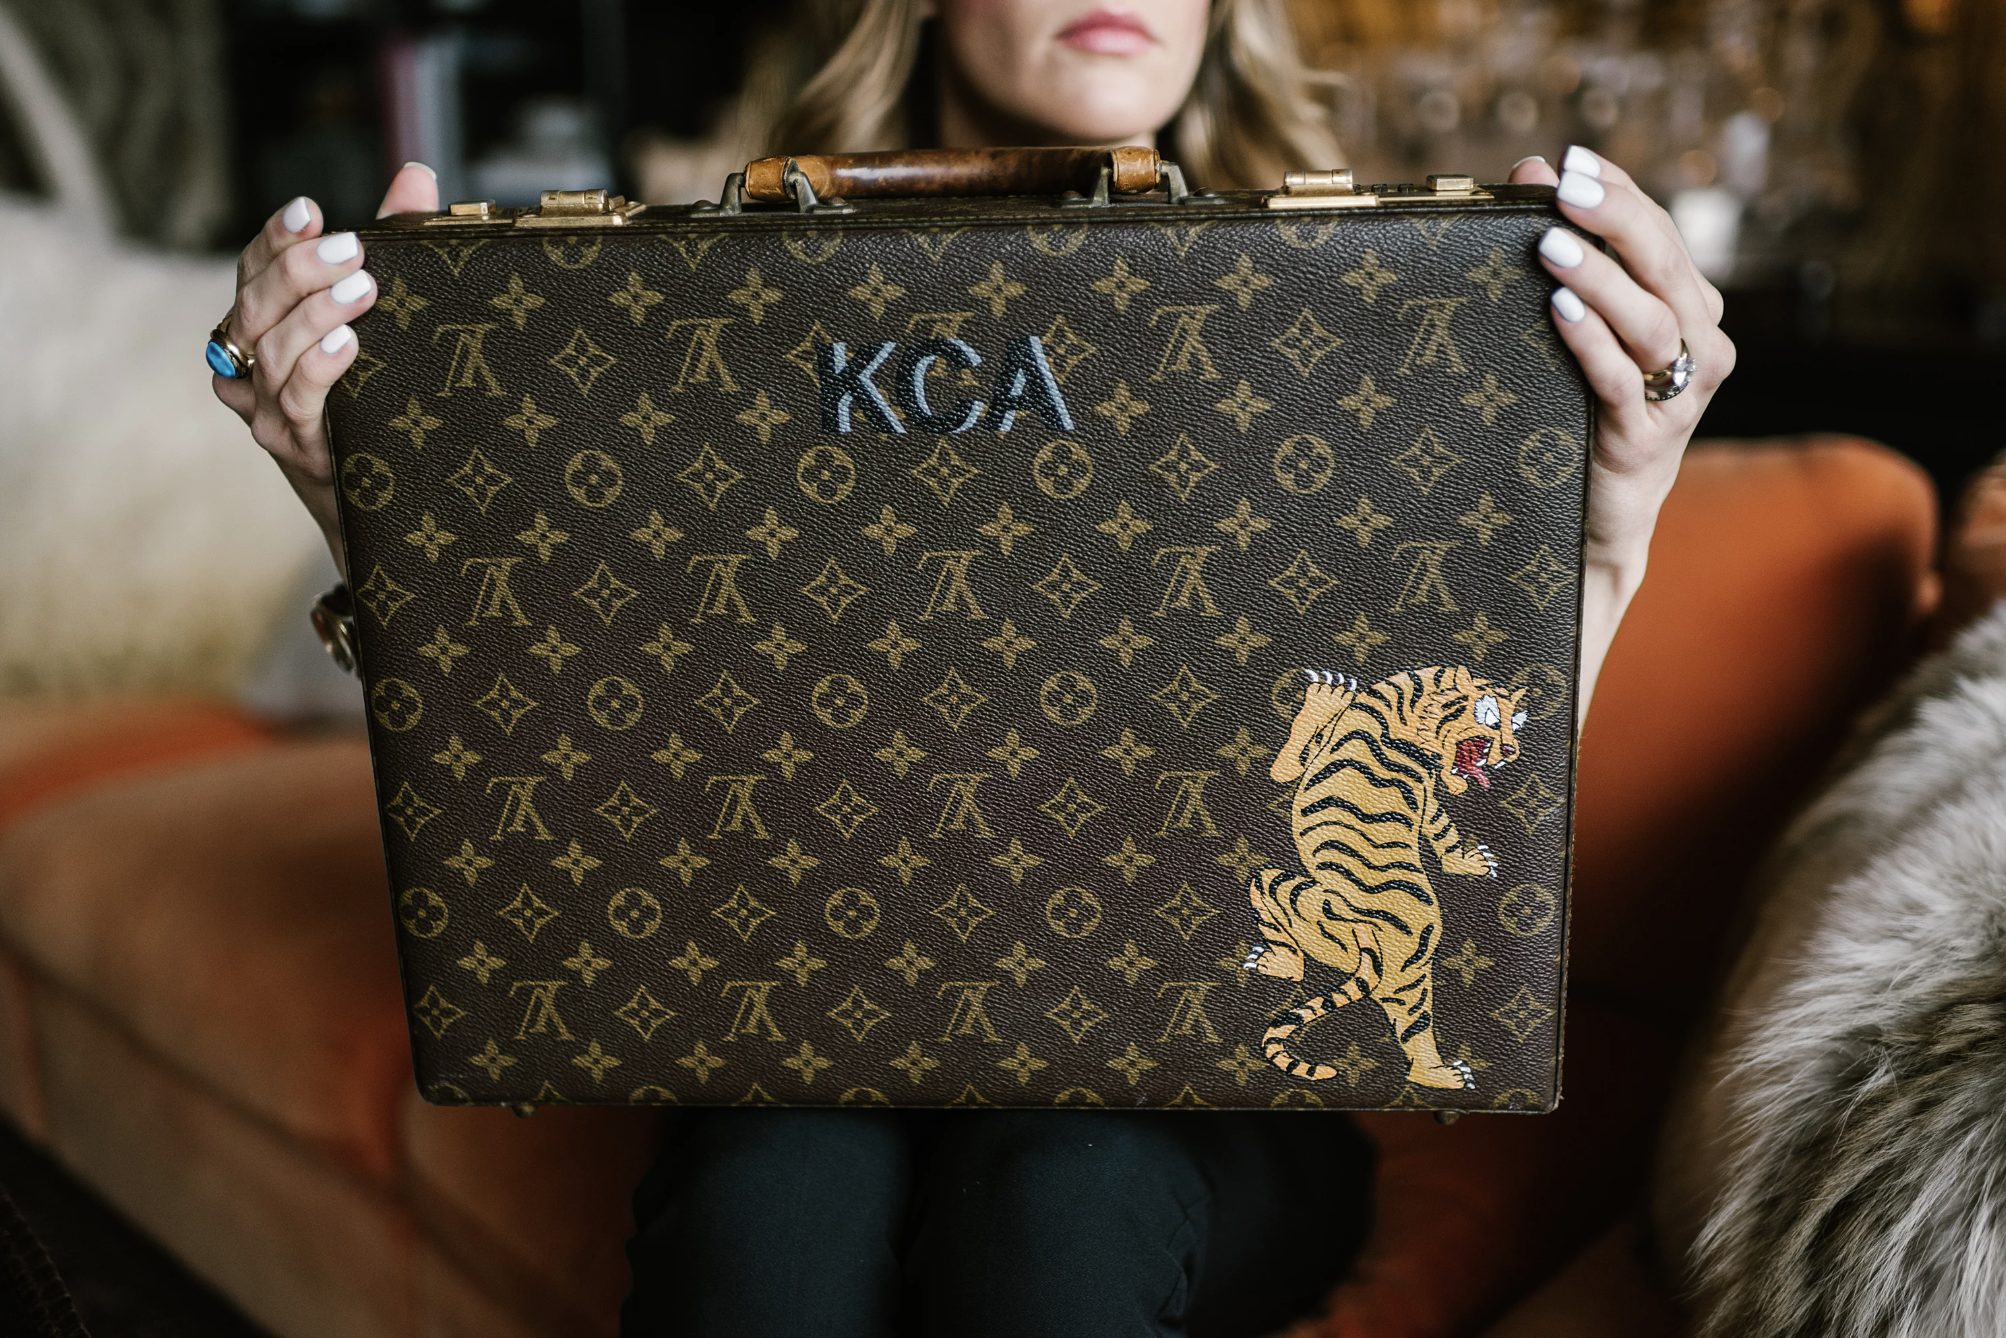 The new monogram: Designer bags customized by Texas artists are swinging up